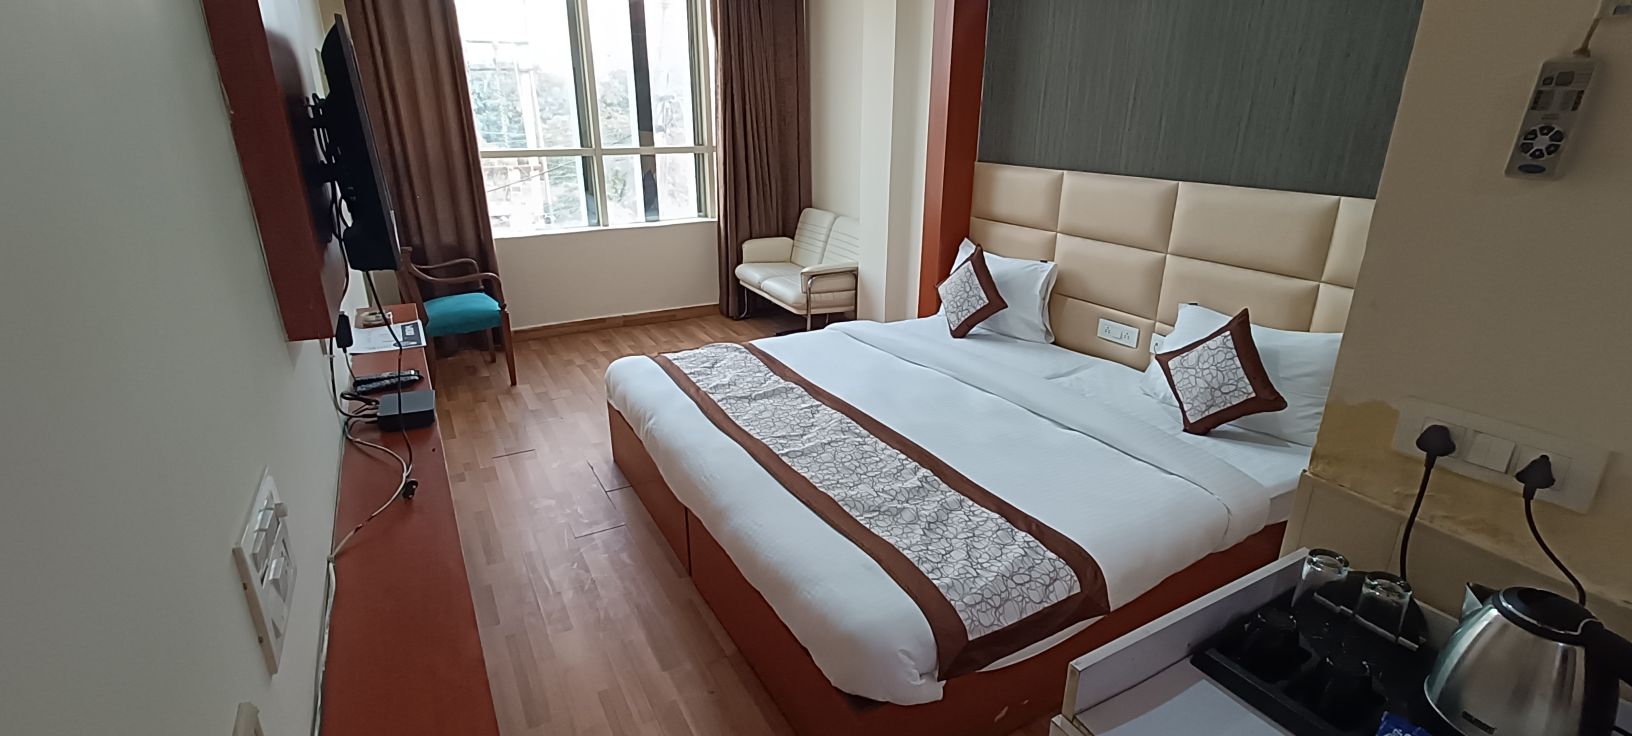 Luxurious Hotel in Sector 39 Gurgaon  Book Now for Exclusiv - Haryana - Gurgaon ID1538836 2